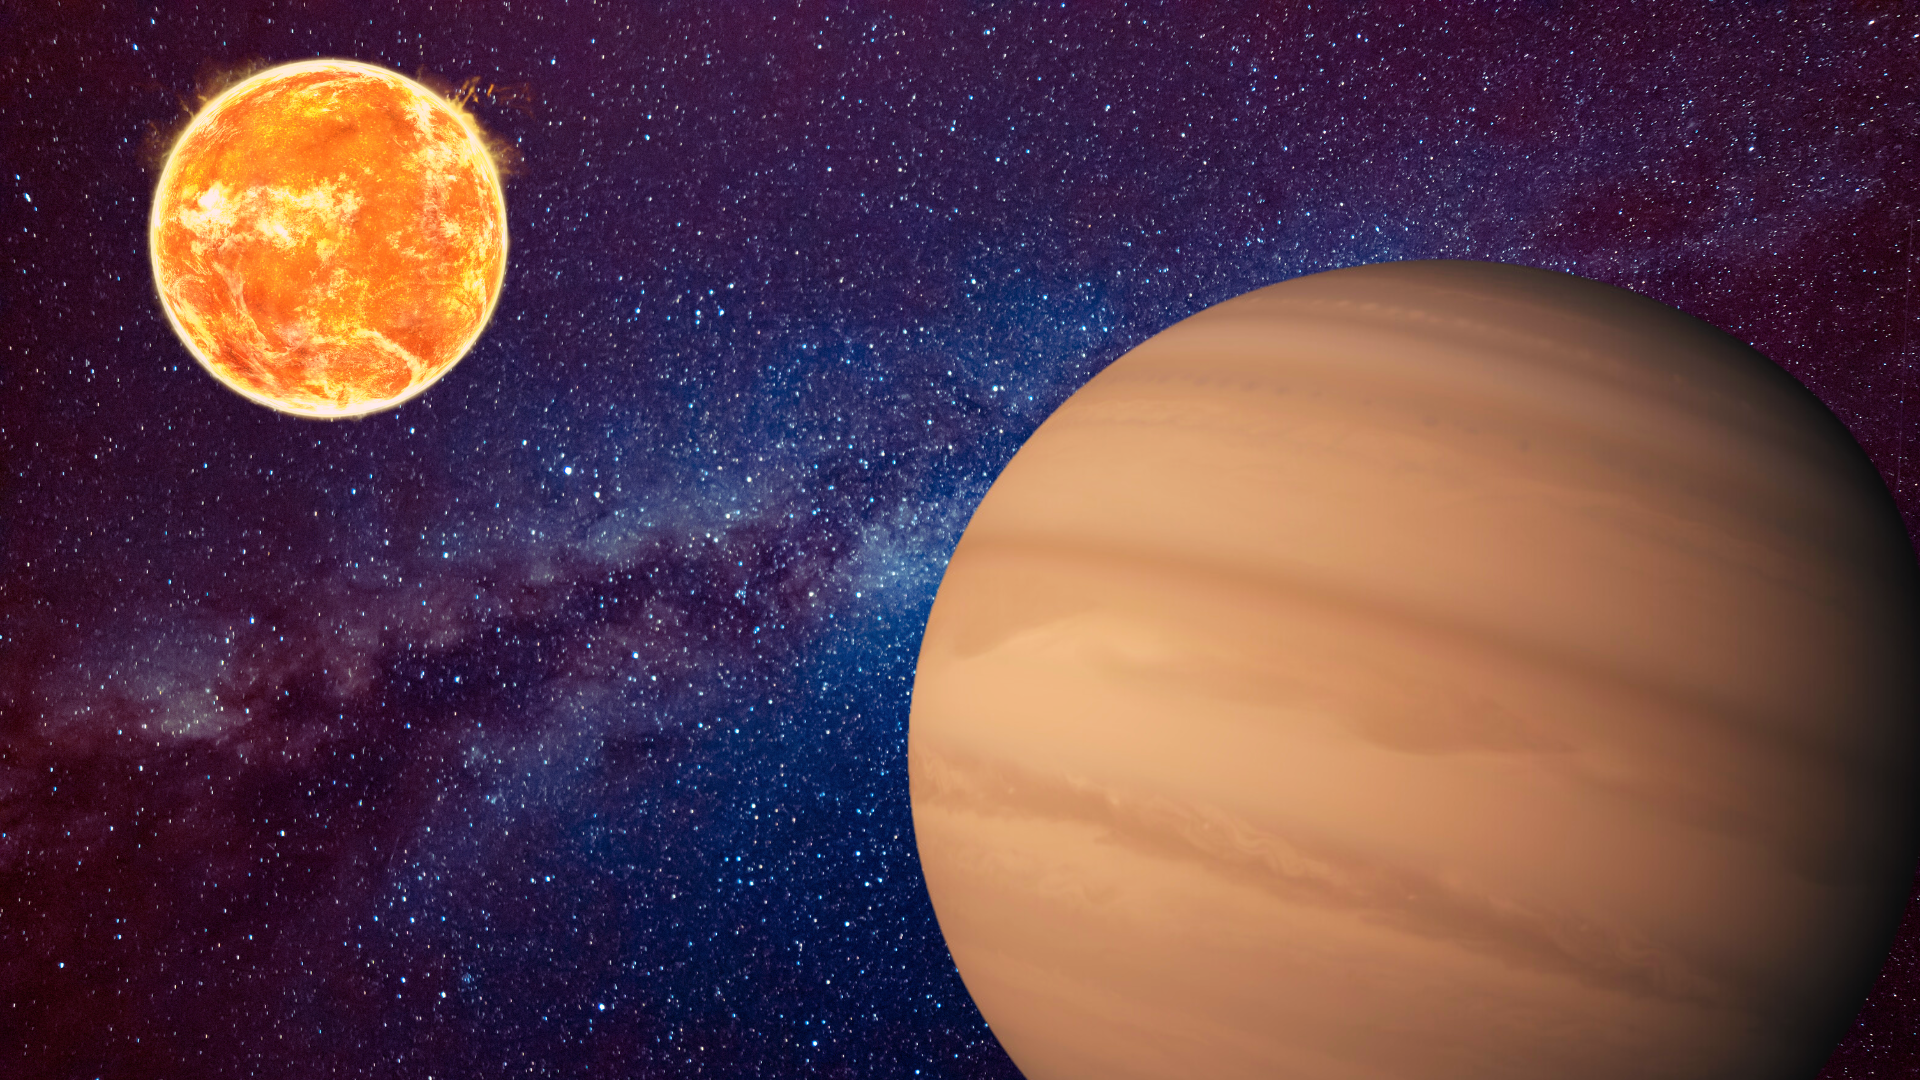 Jupiter-like exoplanets reveal our solar system may not be so unique after all Space